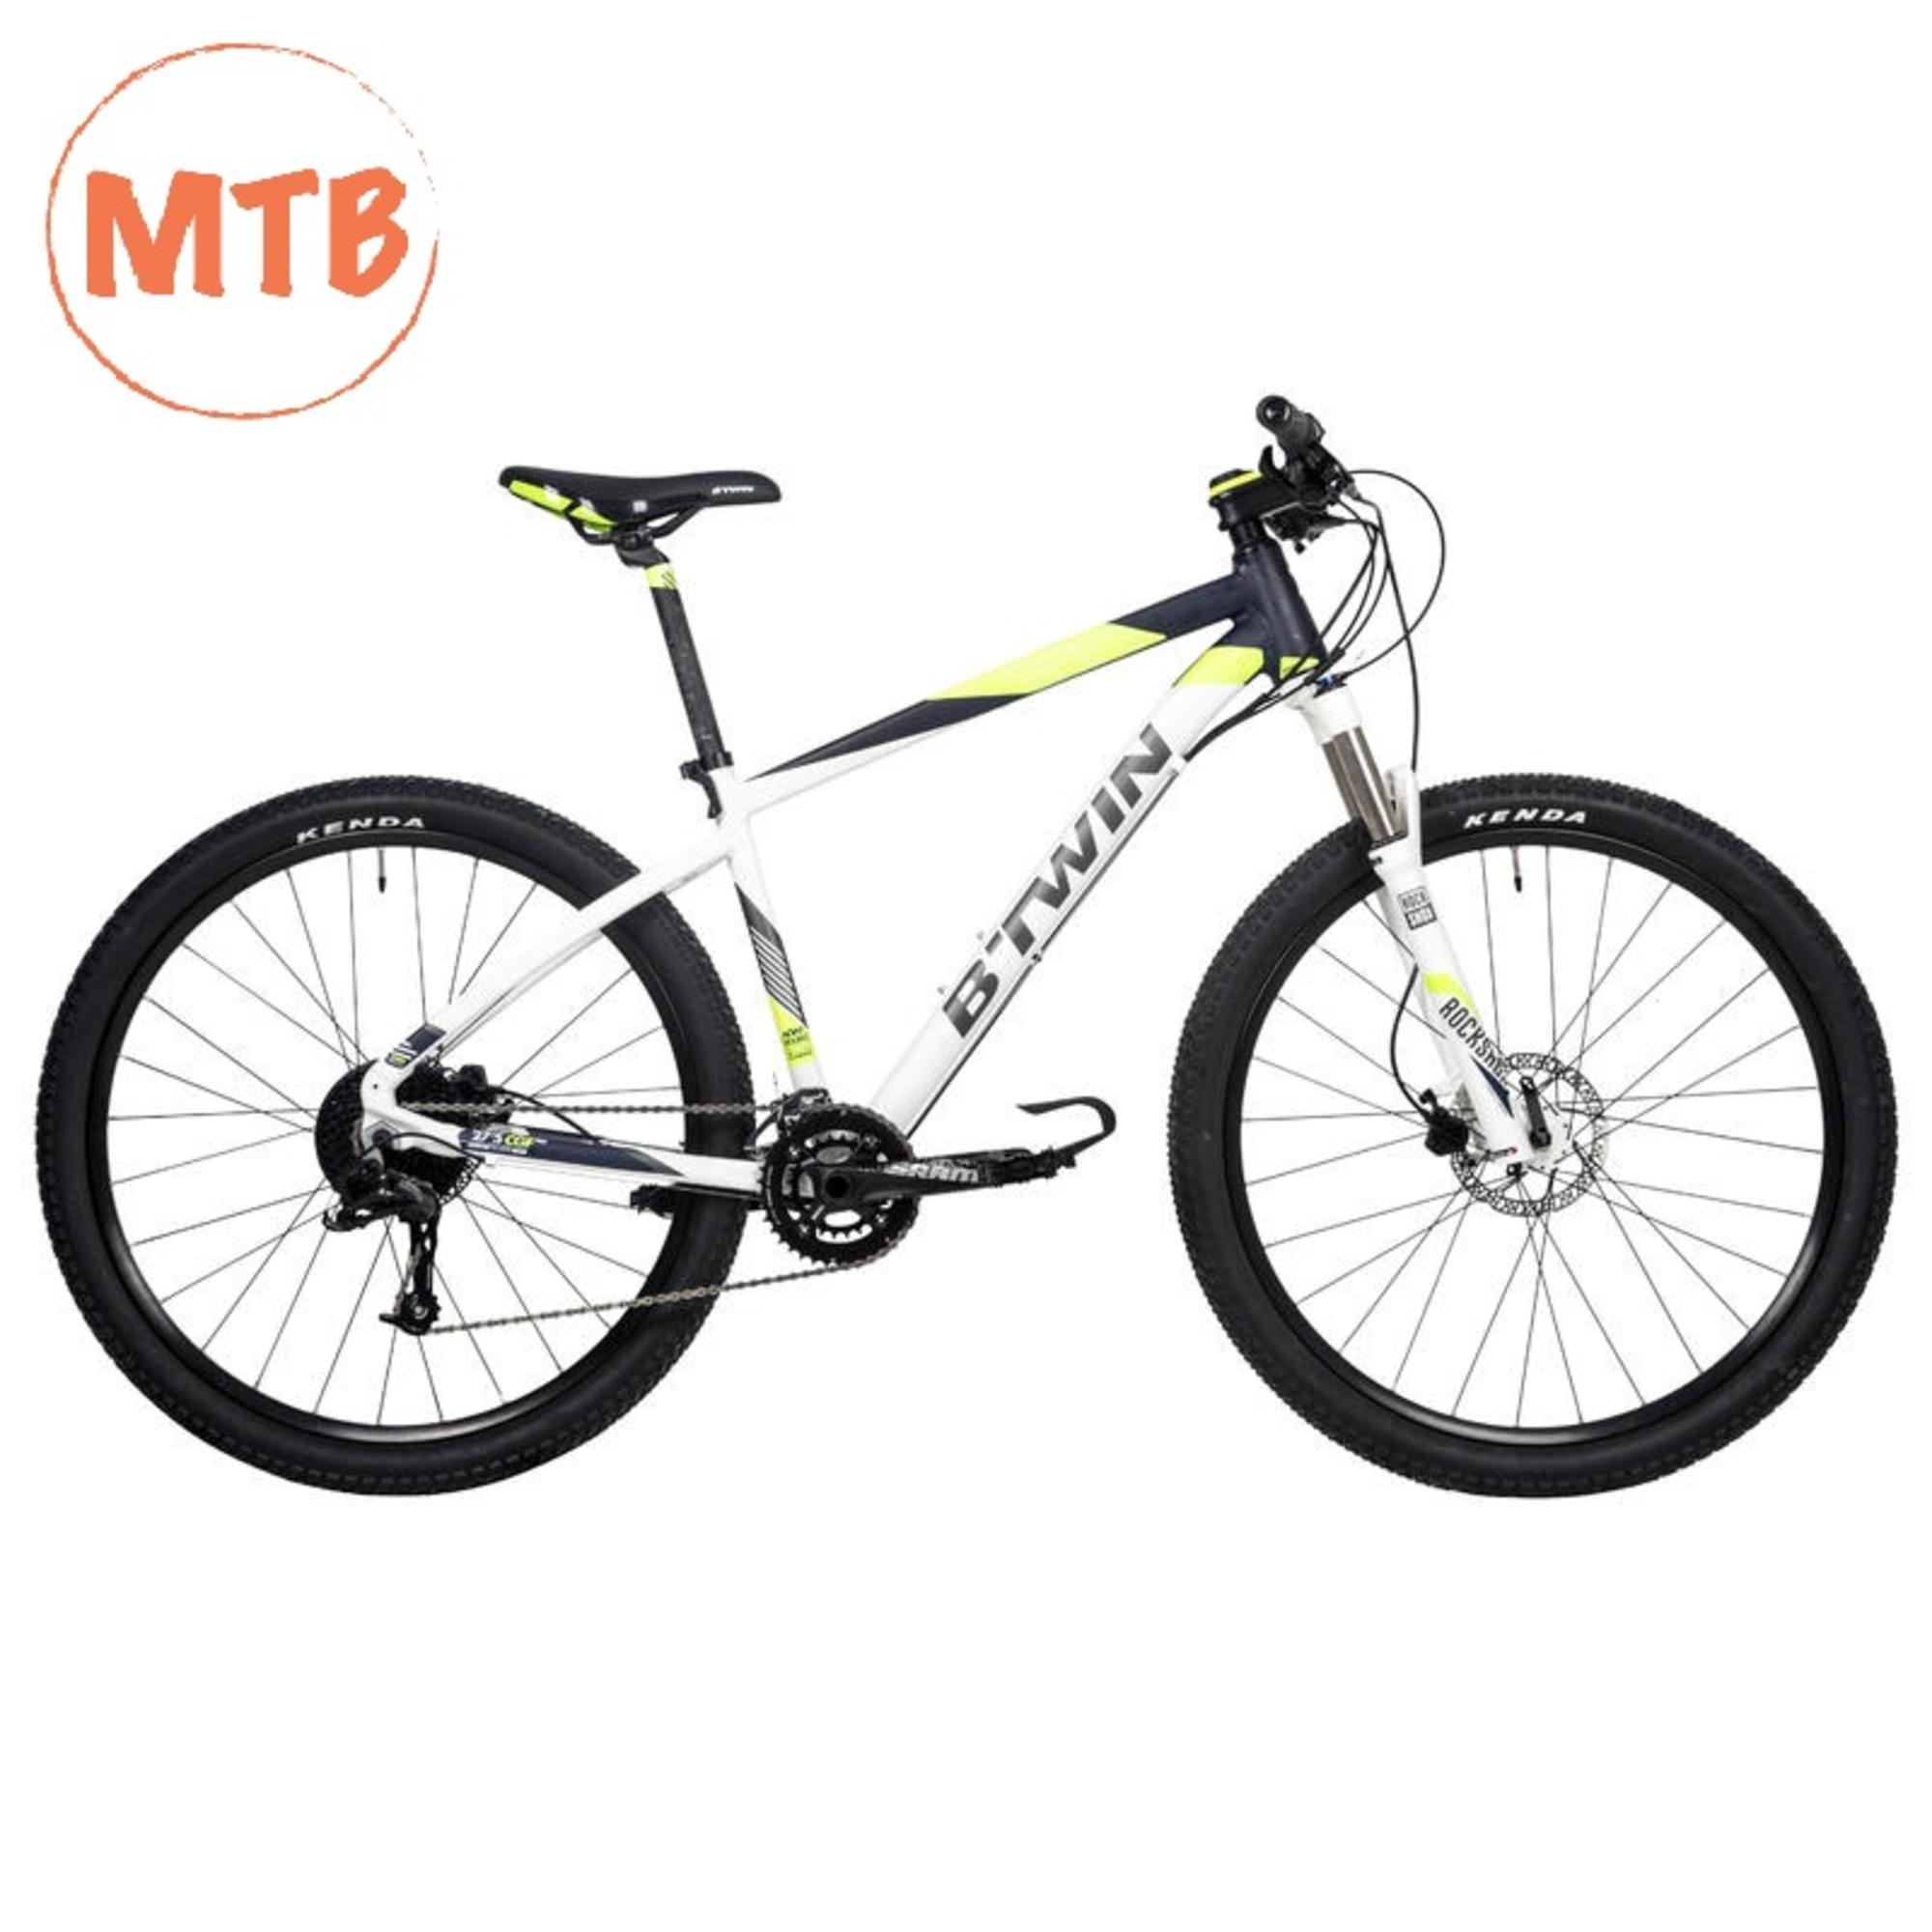 btwin cycle price in decathlon